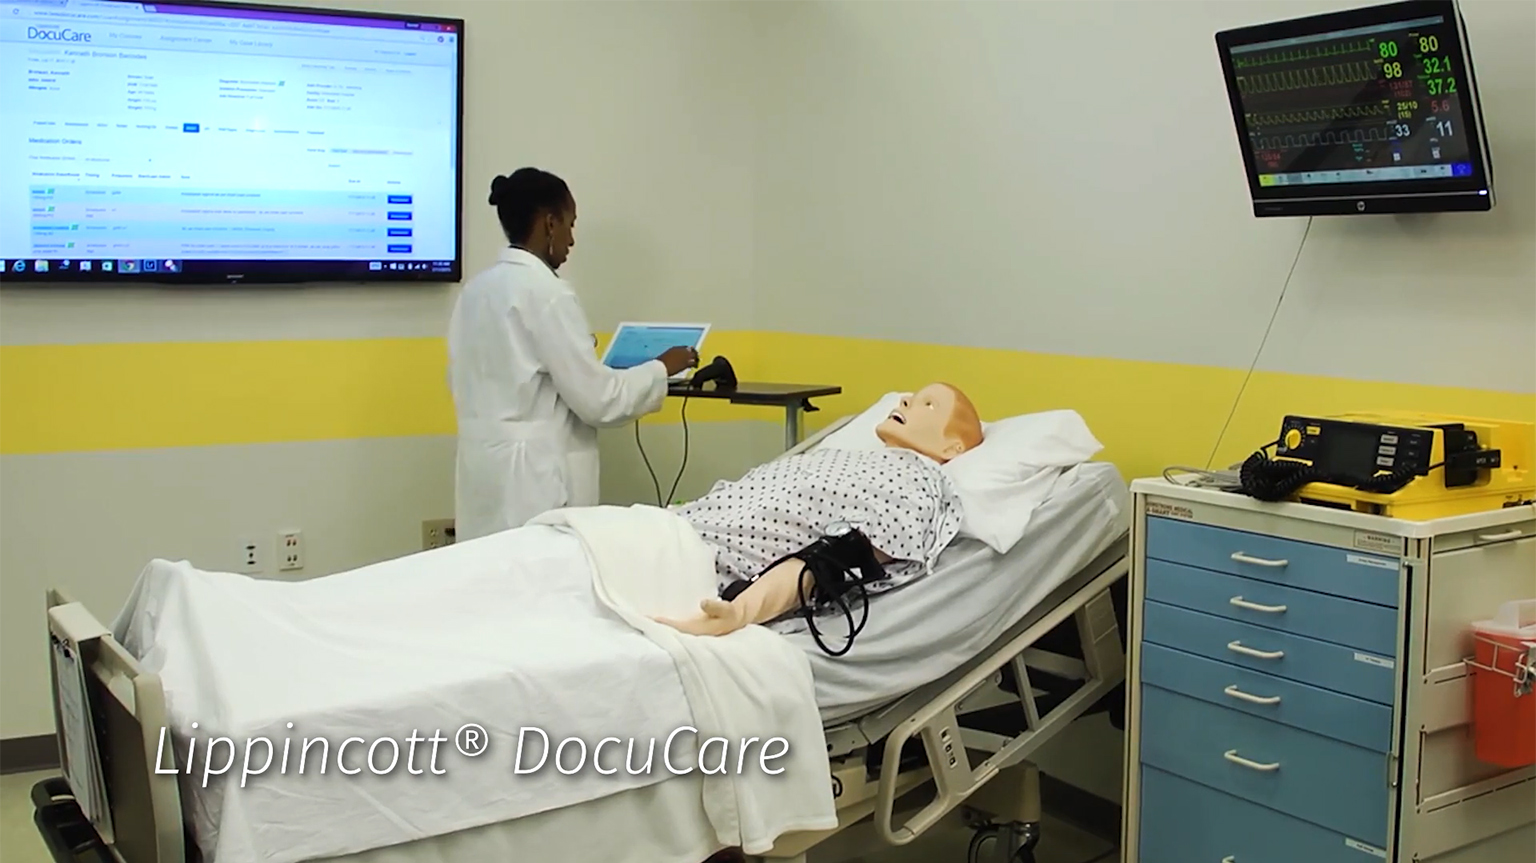 Screenshot from Lippincott DocuCare sizzle video